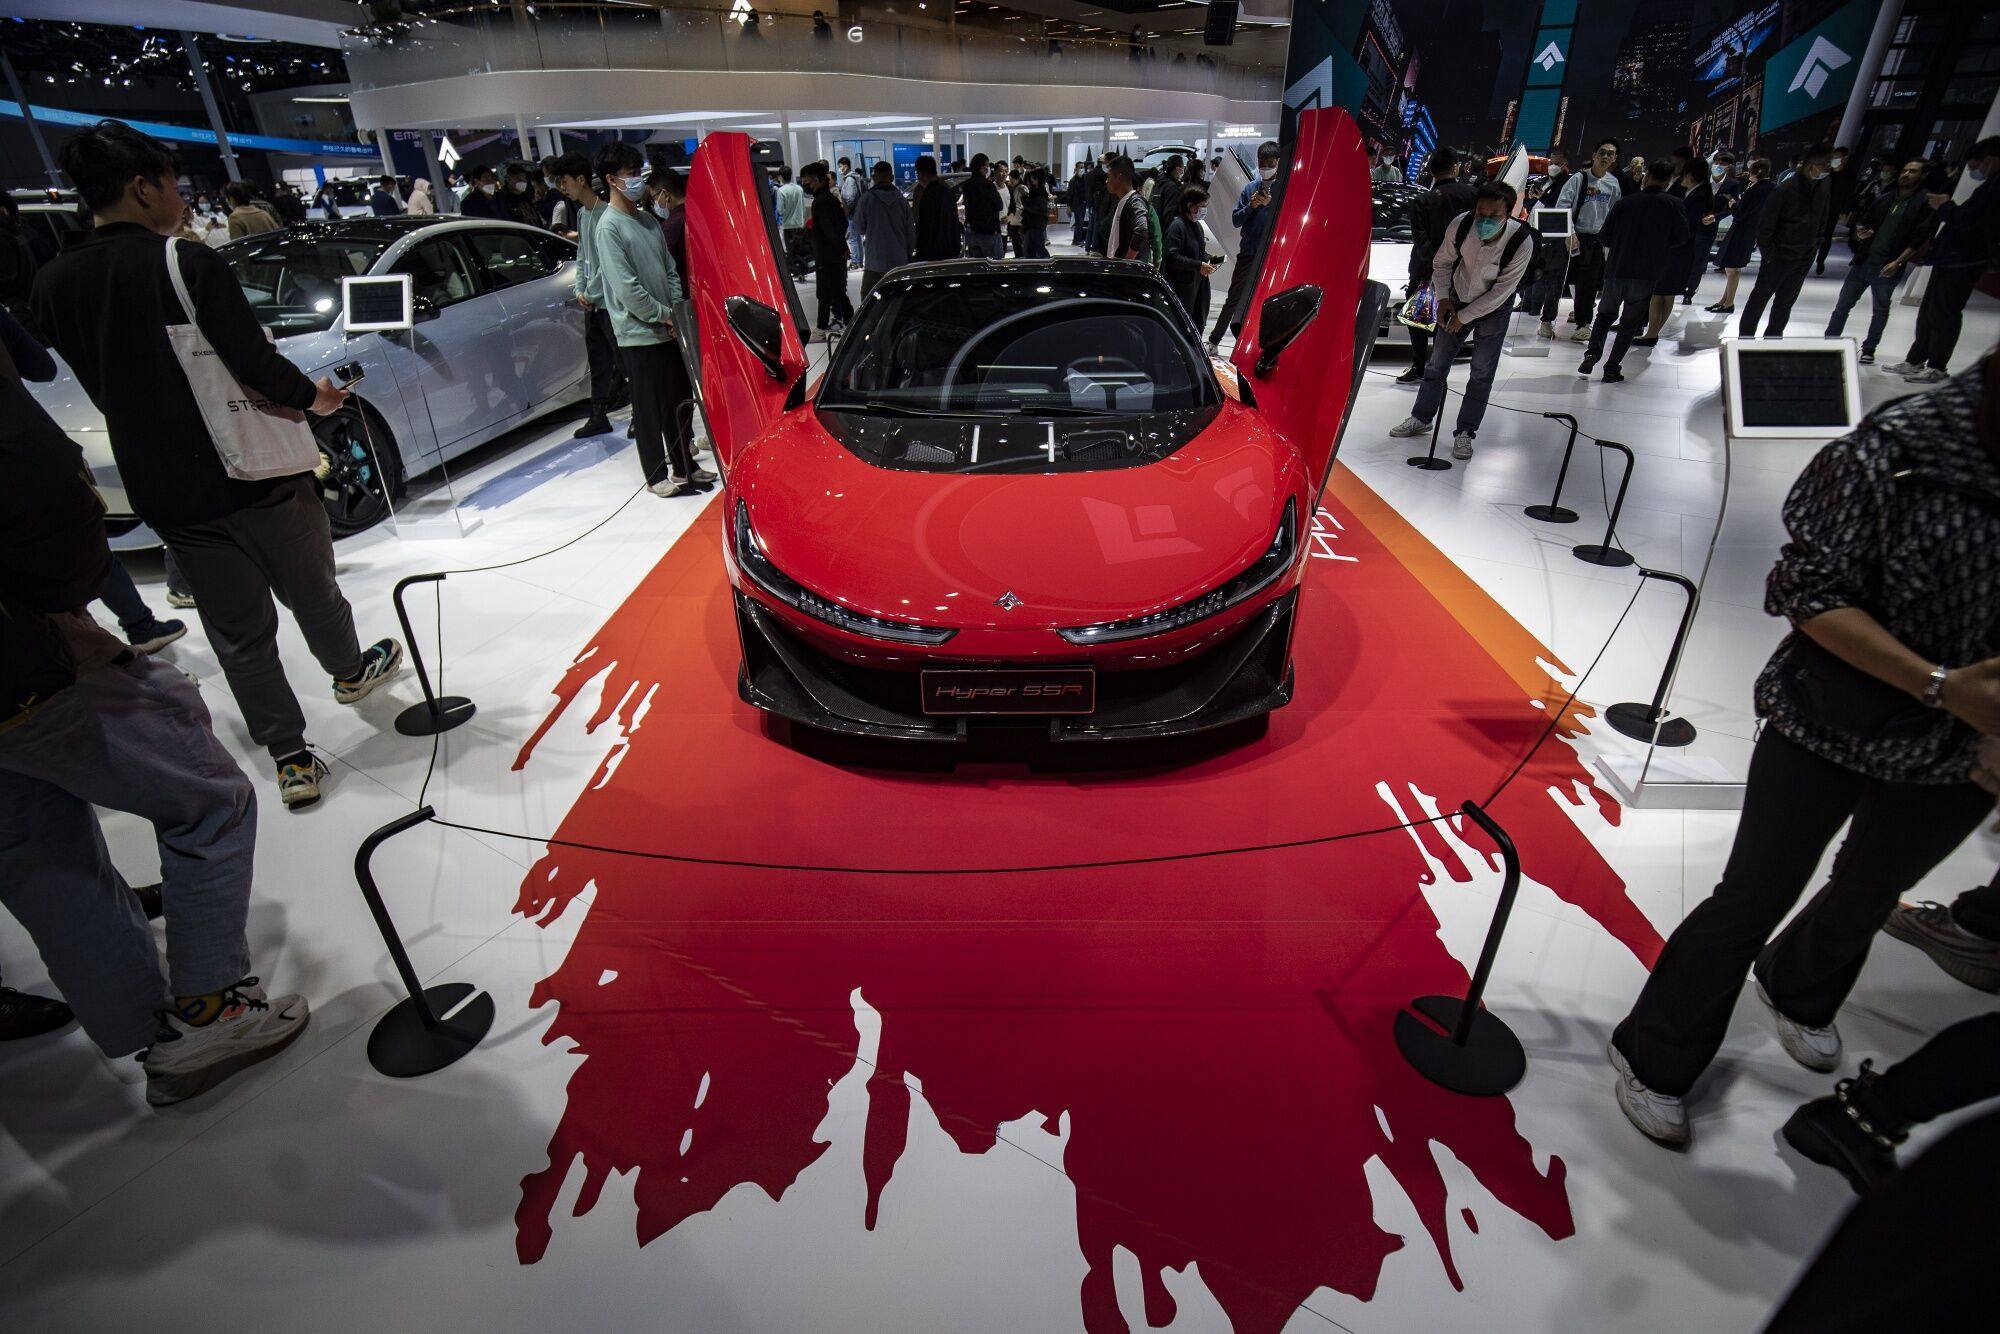 A GAC Aion Hyper SSR electric sports car on display at the Shanghai Auto Show on April 24. China is the world’s largest market for electric vehicles. Photographer: Bloomberg